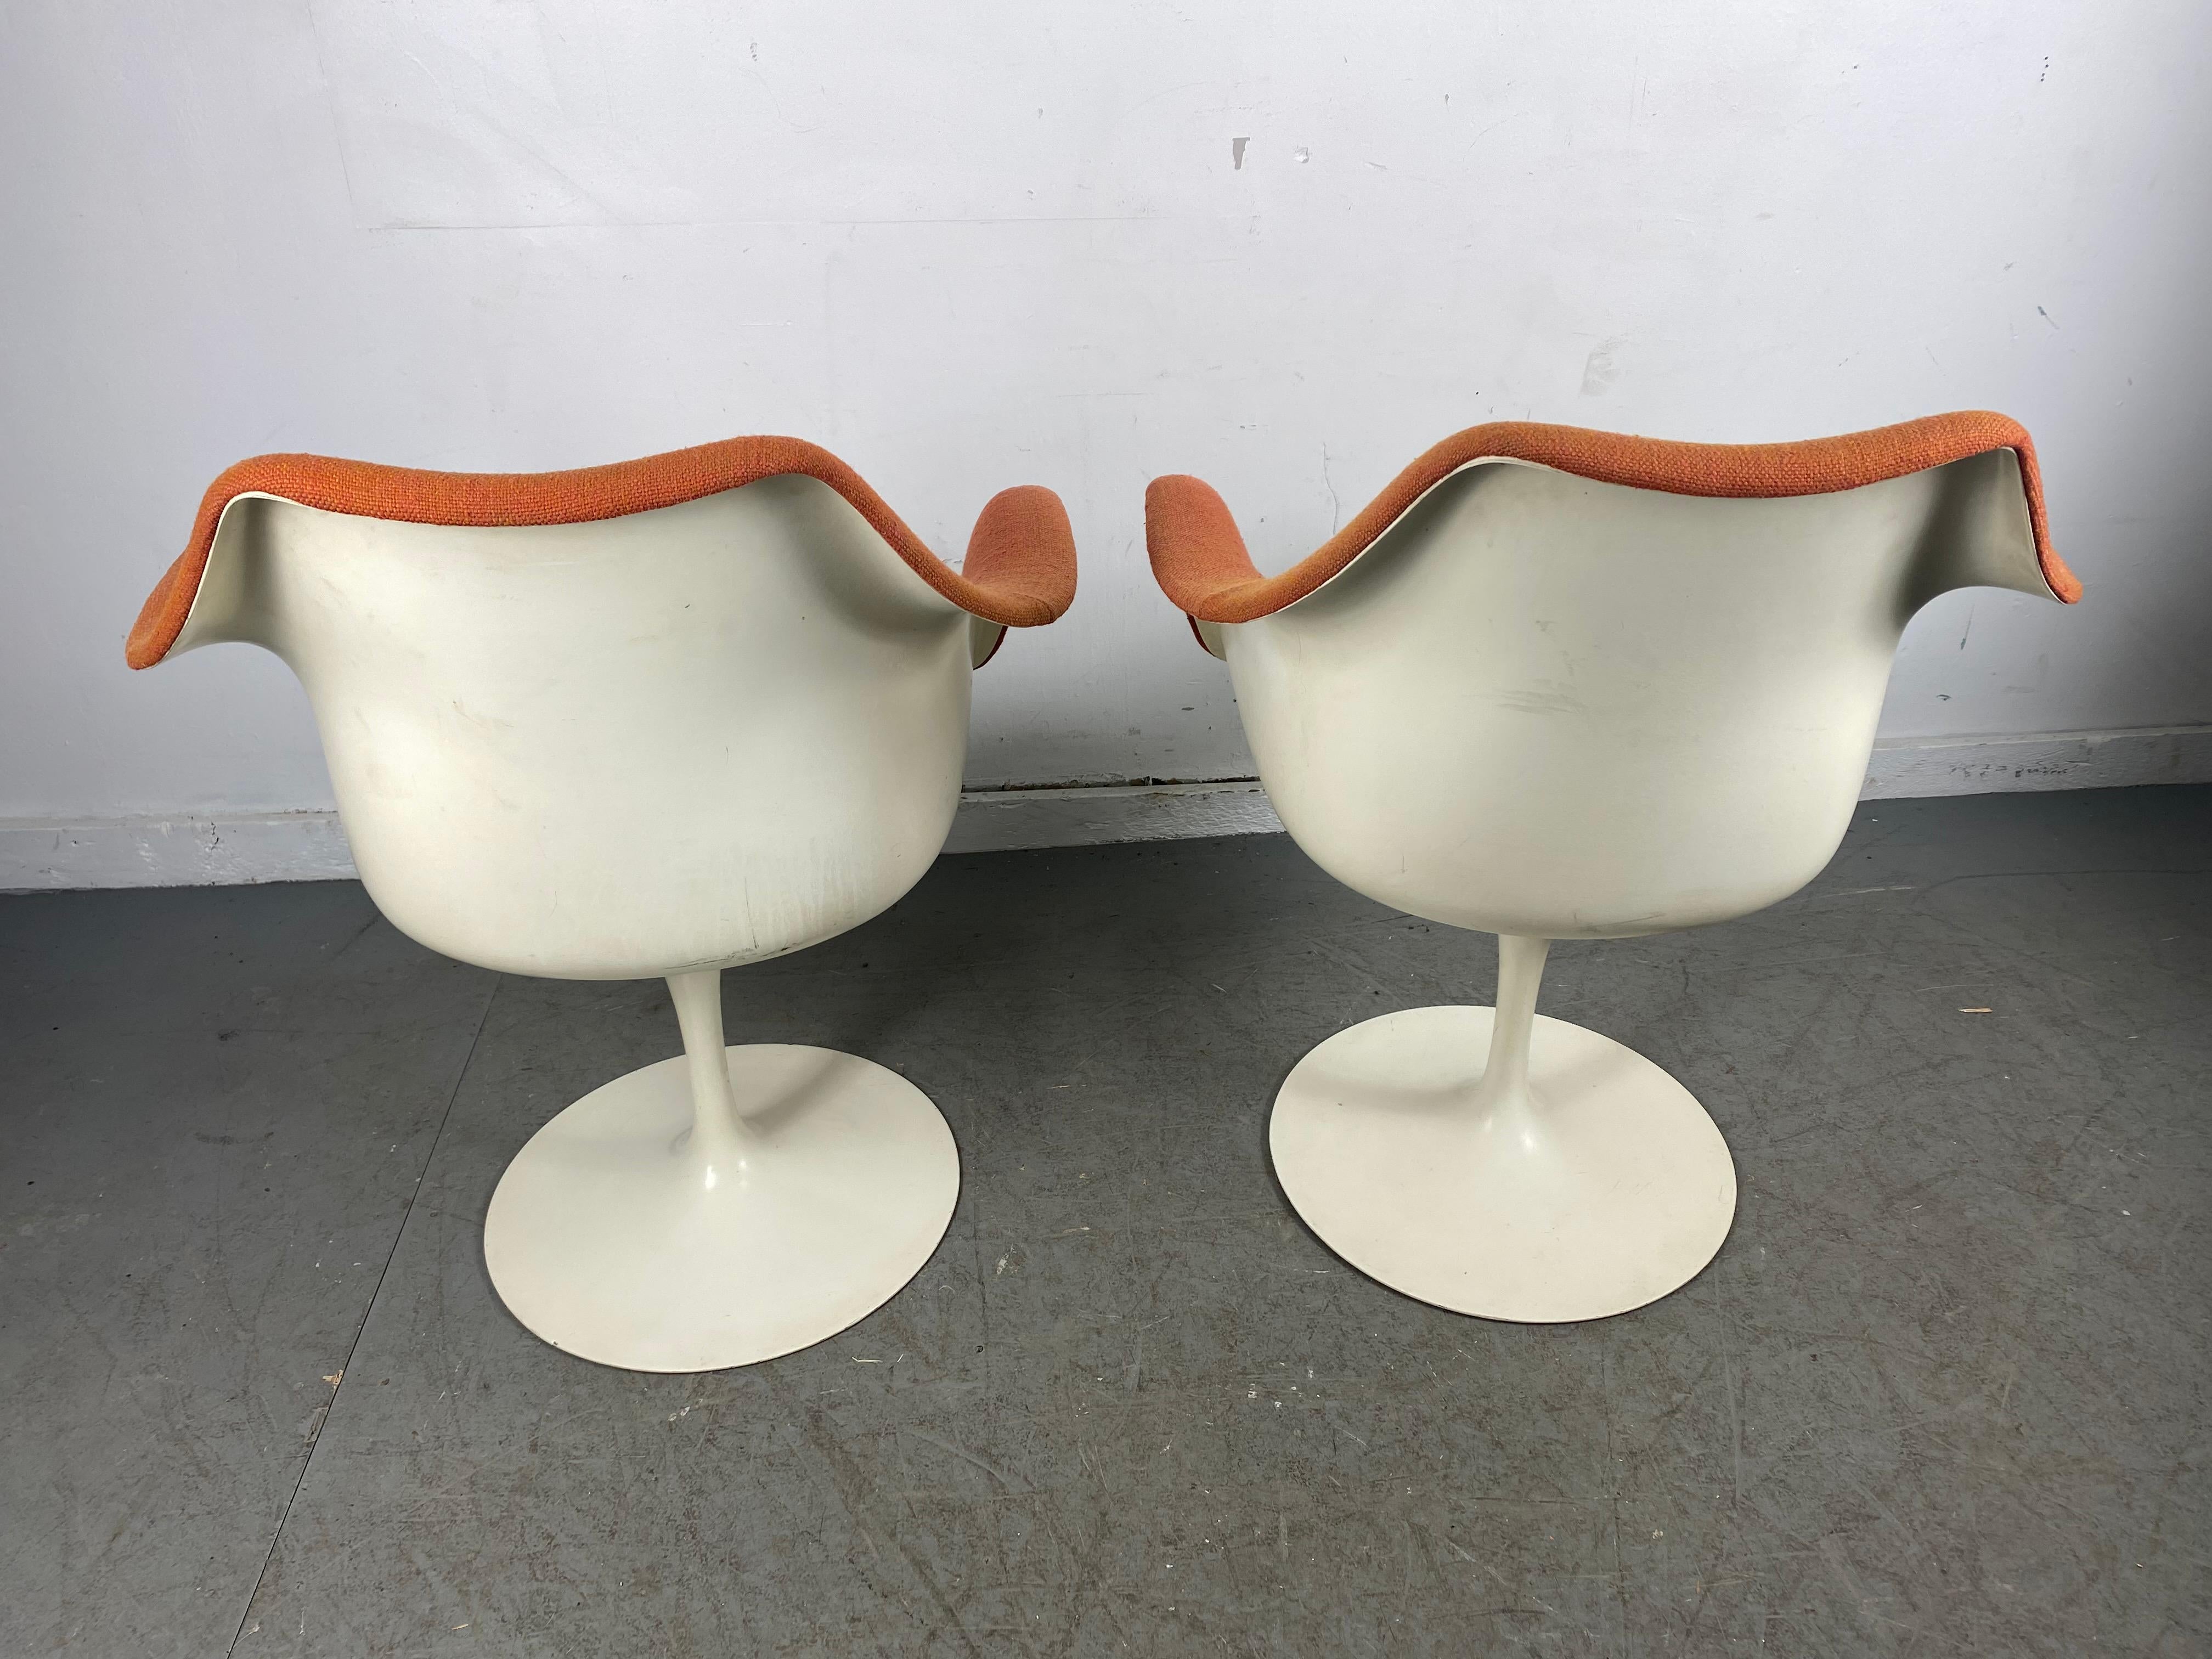 Metal Early Production Eero Saarinen for Knoll Upholstered Tulip Arm Chairs